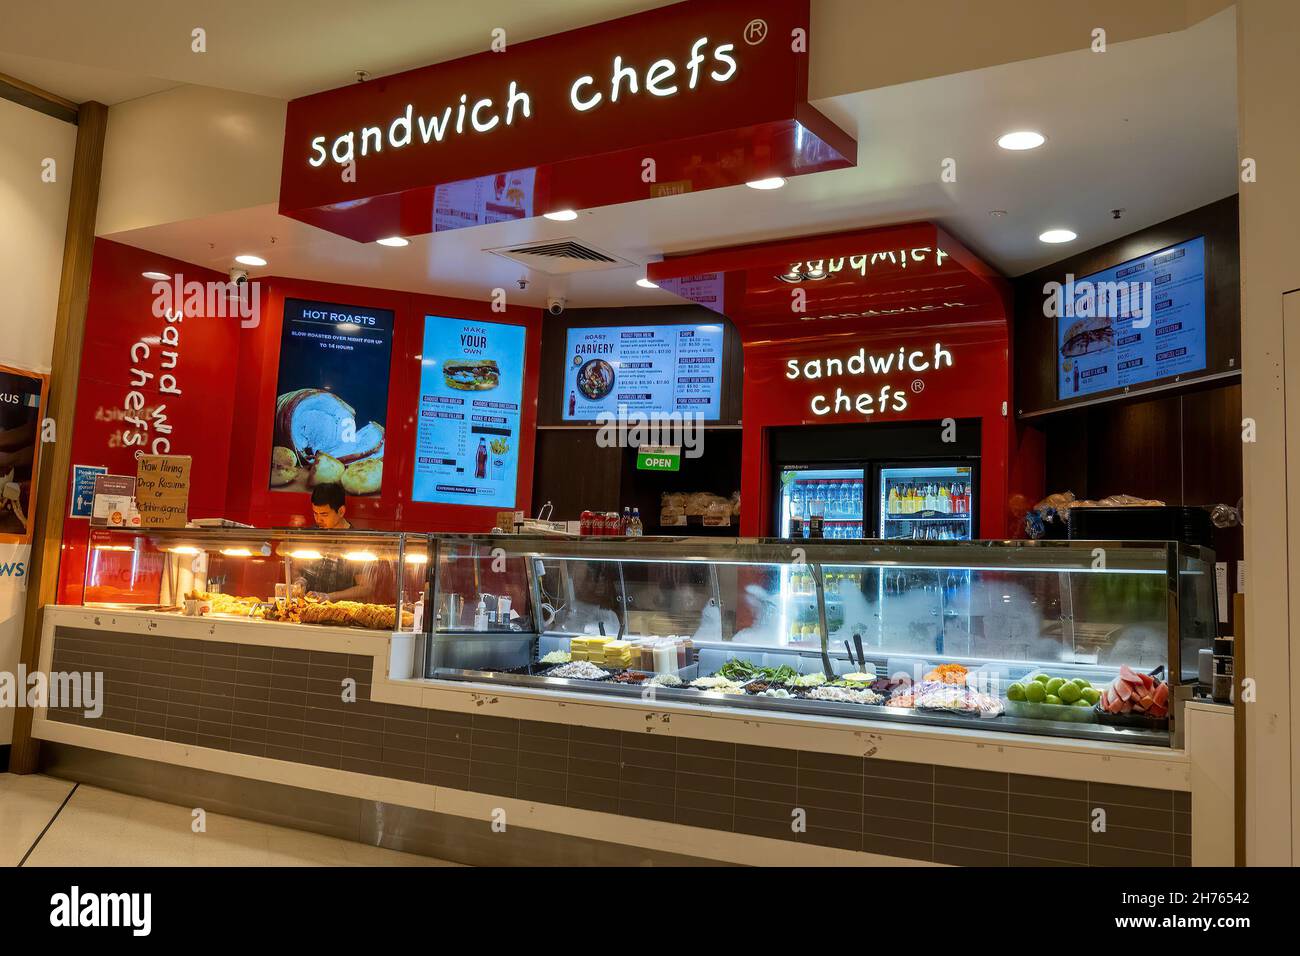 https://c8.alamy.com/comp/2H76542/townsville-queensland-australia-november-2021-sandwich-chefs-food-bar-in-shopping-center-with-server-behind-the-counter-2H76542.jpg